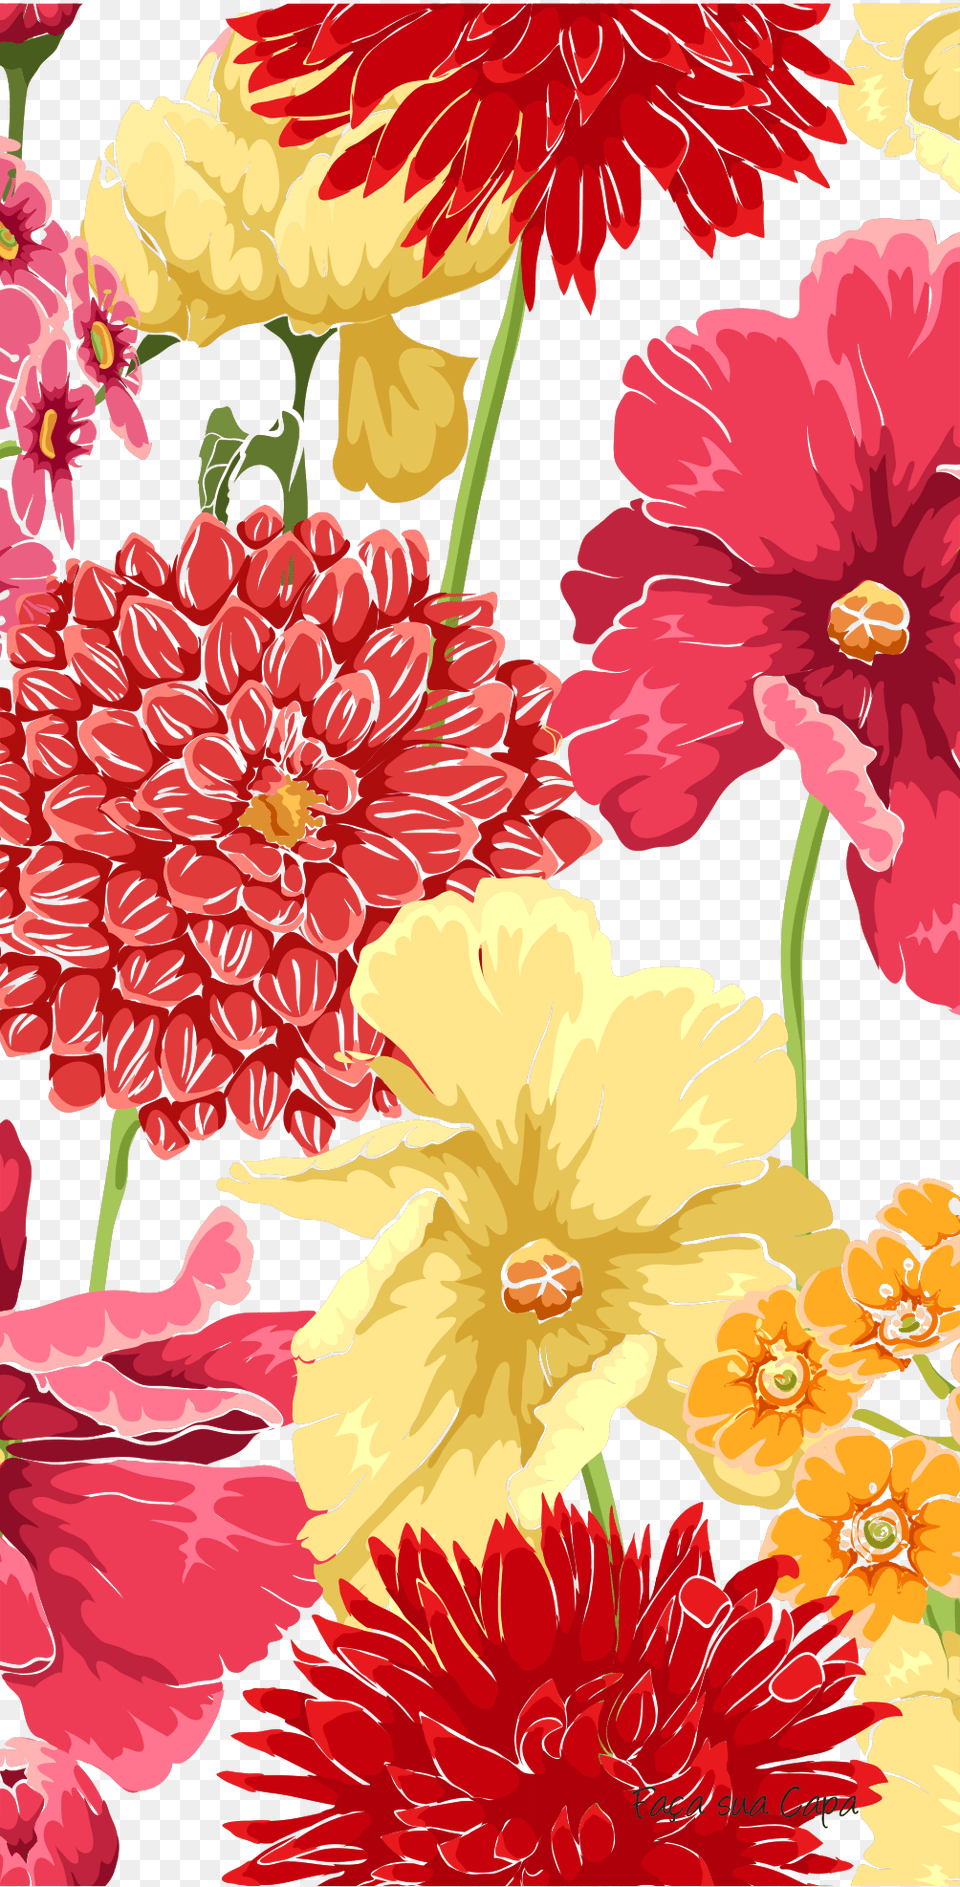 Pin By Yolandamelia On Halo Yellow And Pink Floral Journal, Plant, Flower, Dahlia, Carnation Free Png Download